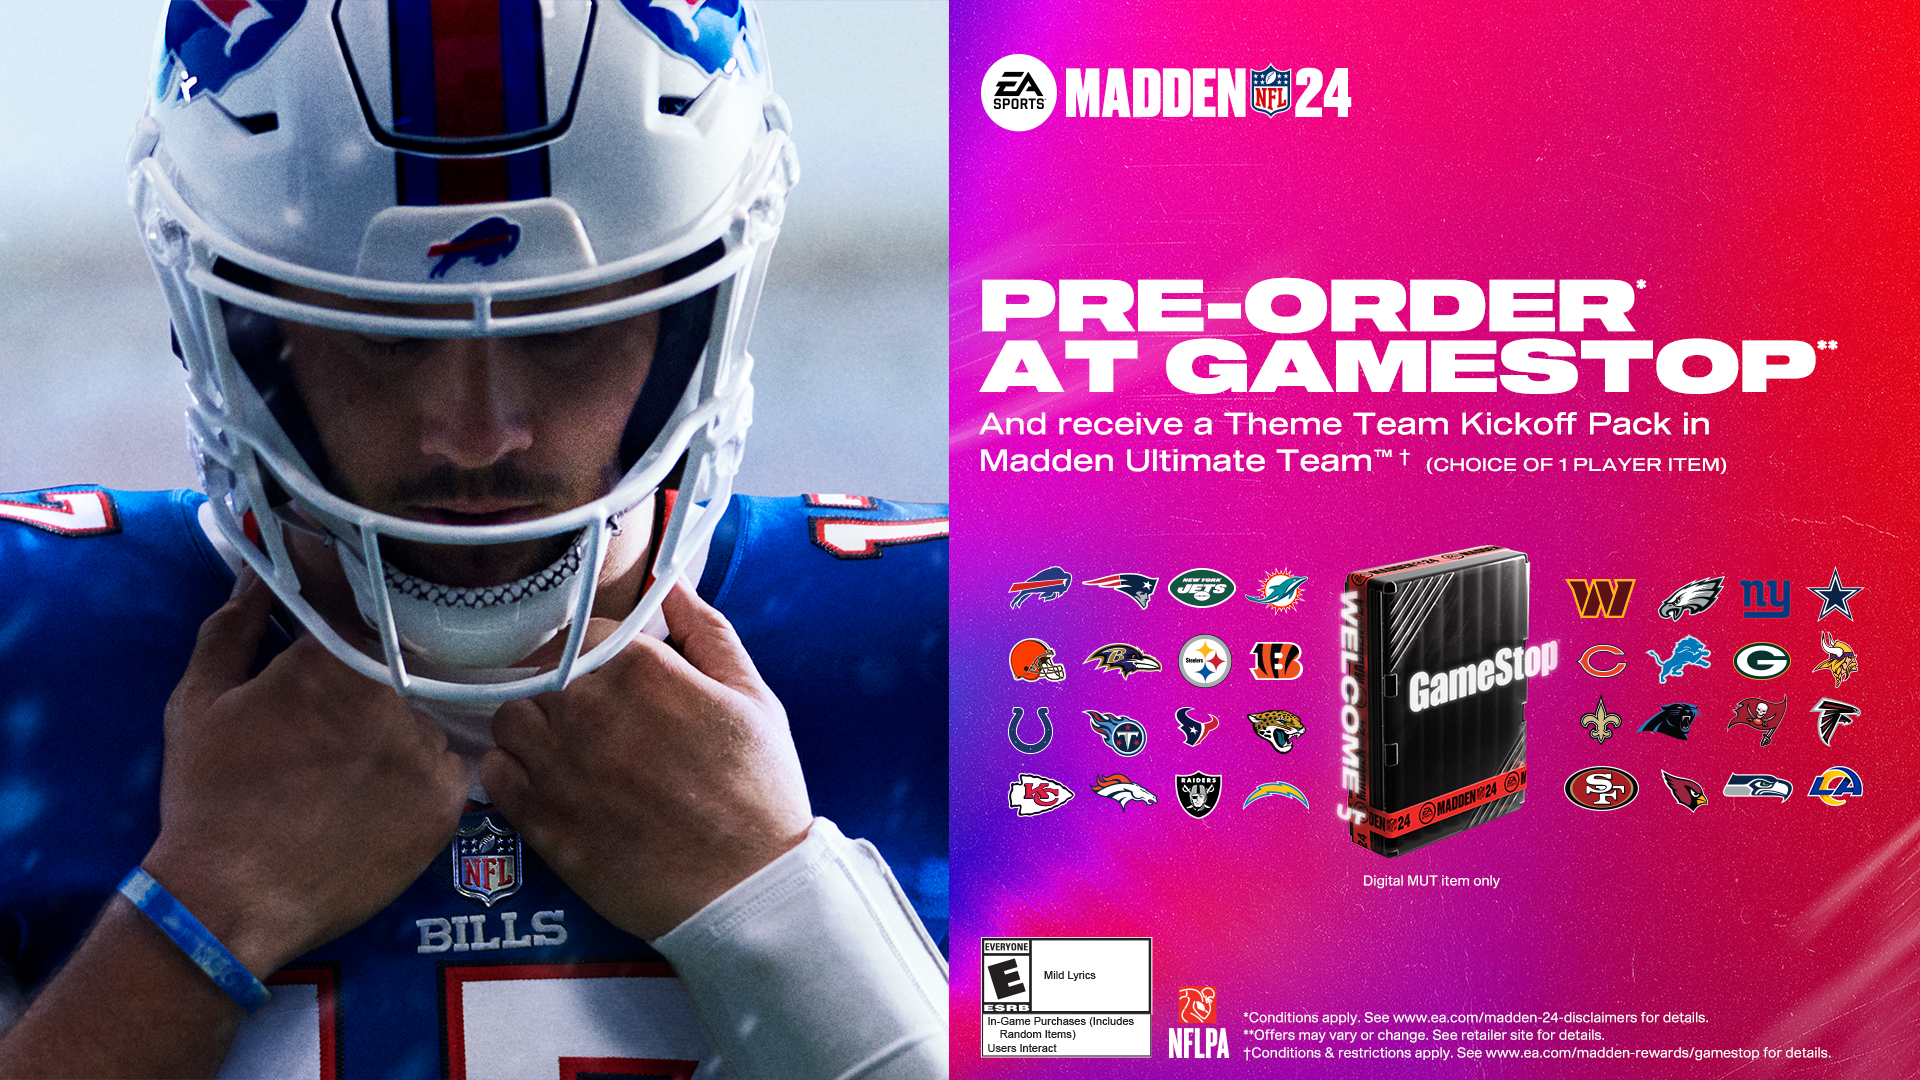 Madden NFL 23 Pre-Orders: Everything You Need To Know